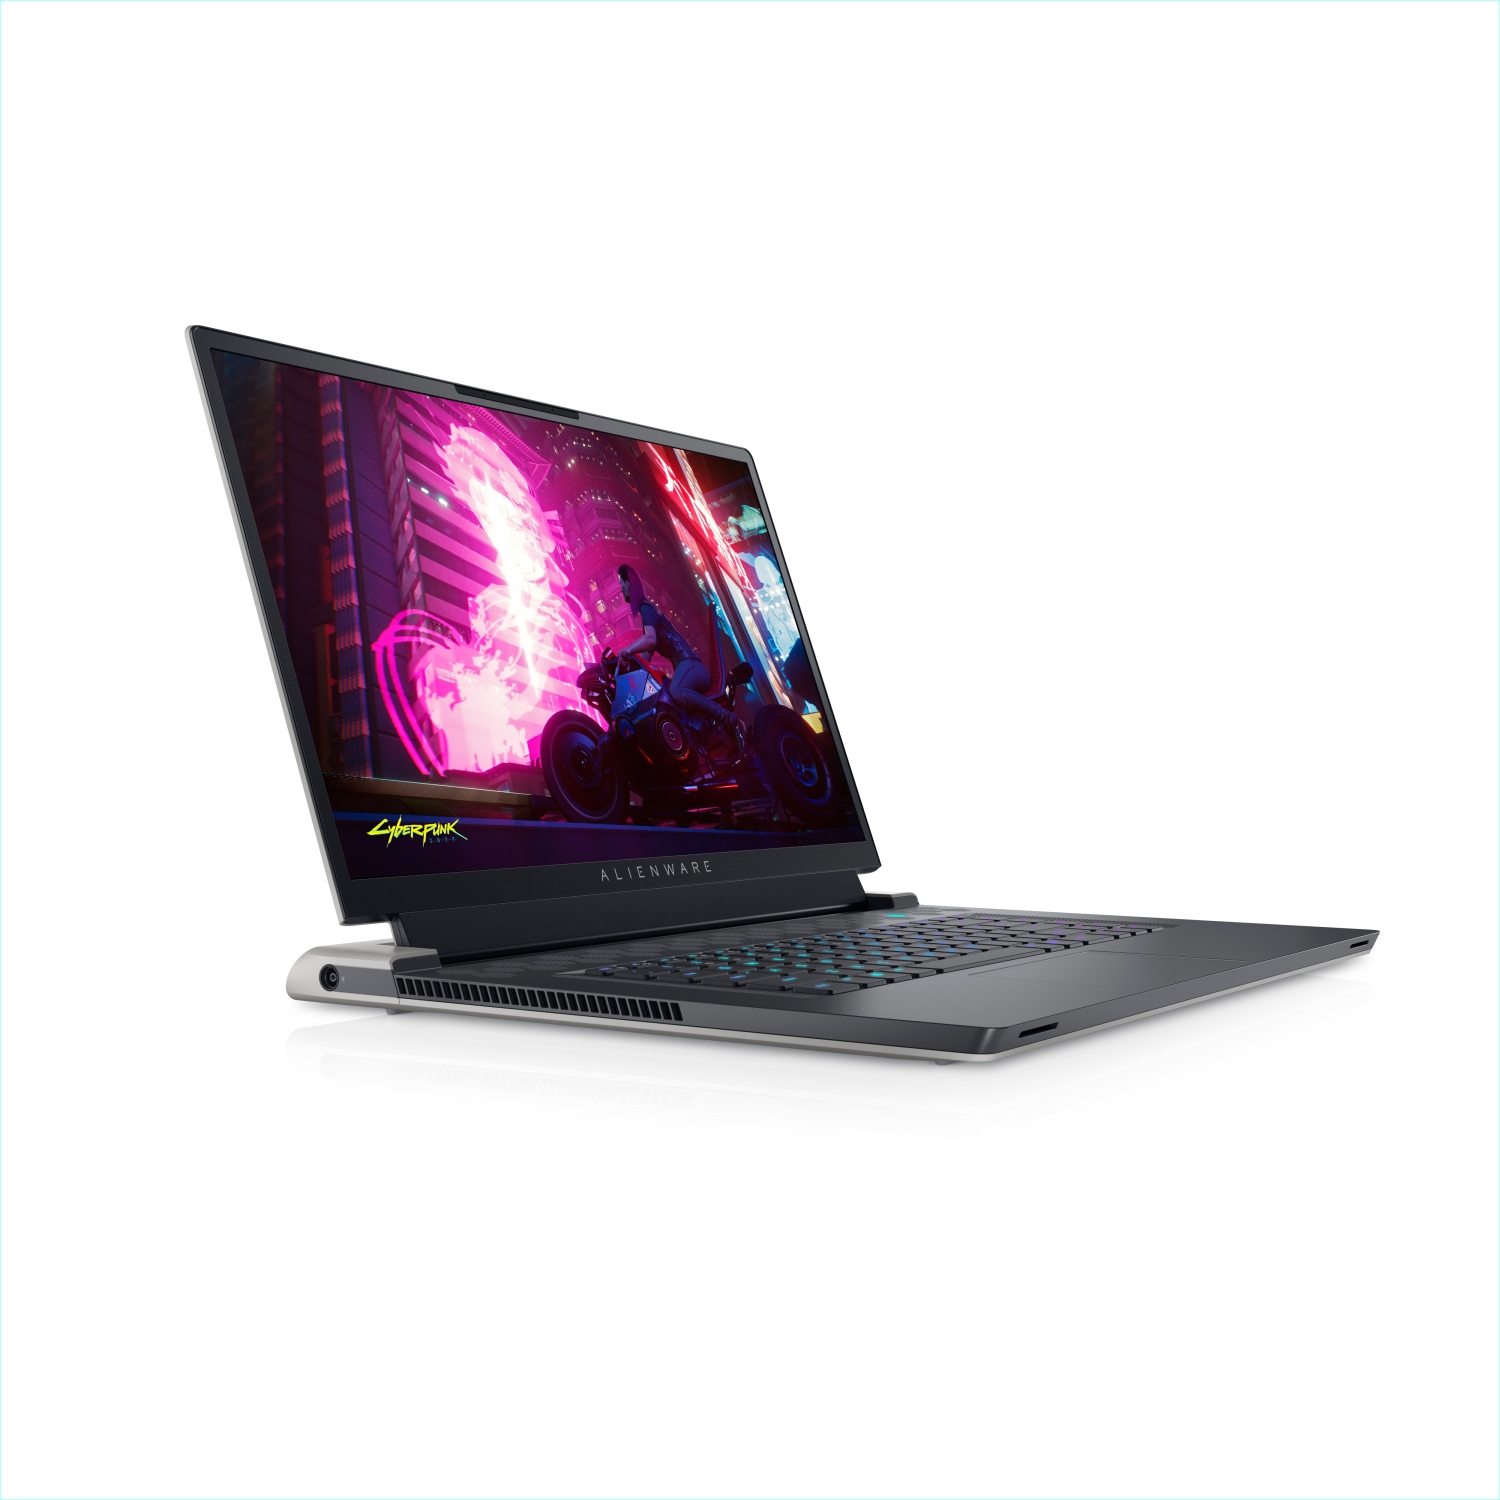 Refurbished (Excellent) - Dell Alienware X17 R1 Gaming Laptop (2021), 17.3" 4K, Core i9, 512GB SSD, 64GB RAM, RTX 3080, 8 Cores @ 5 GHz, 11th Gen CPU Certified